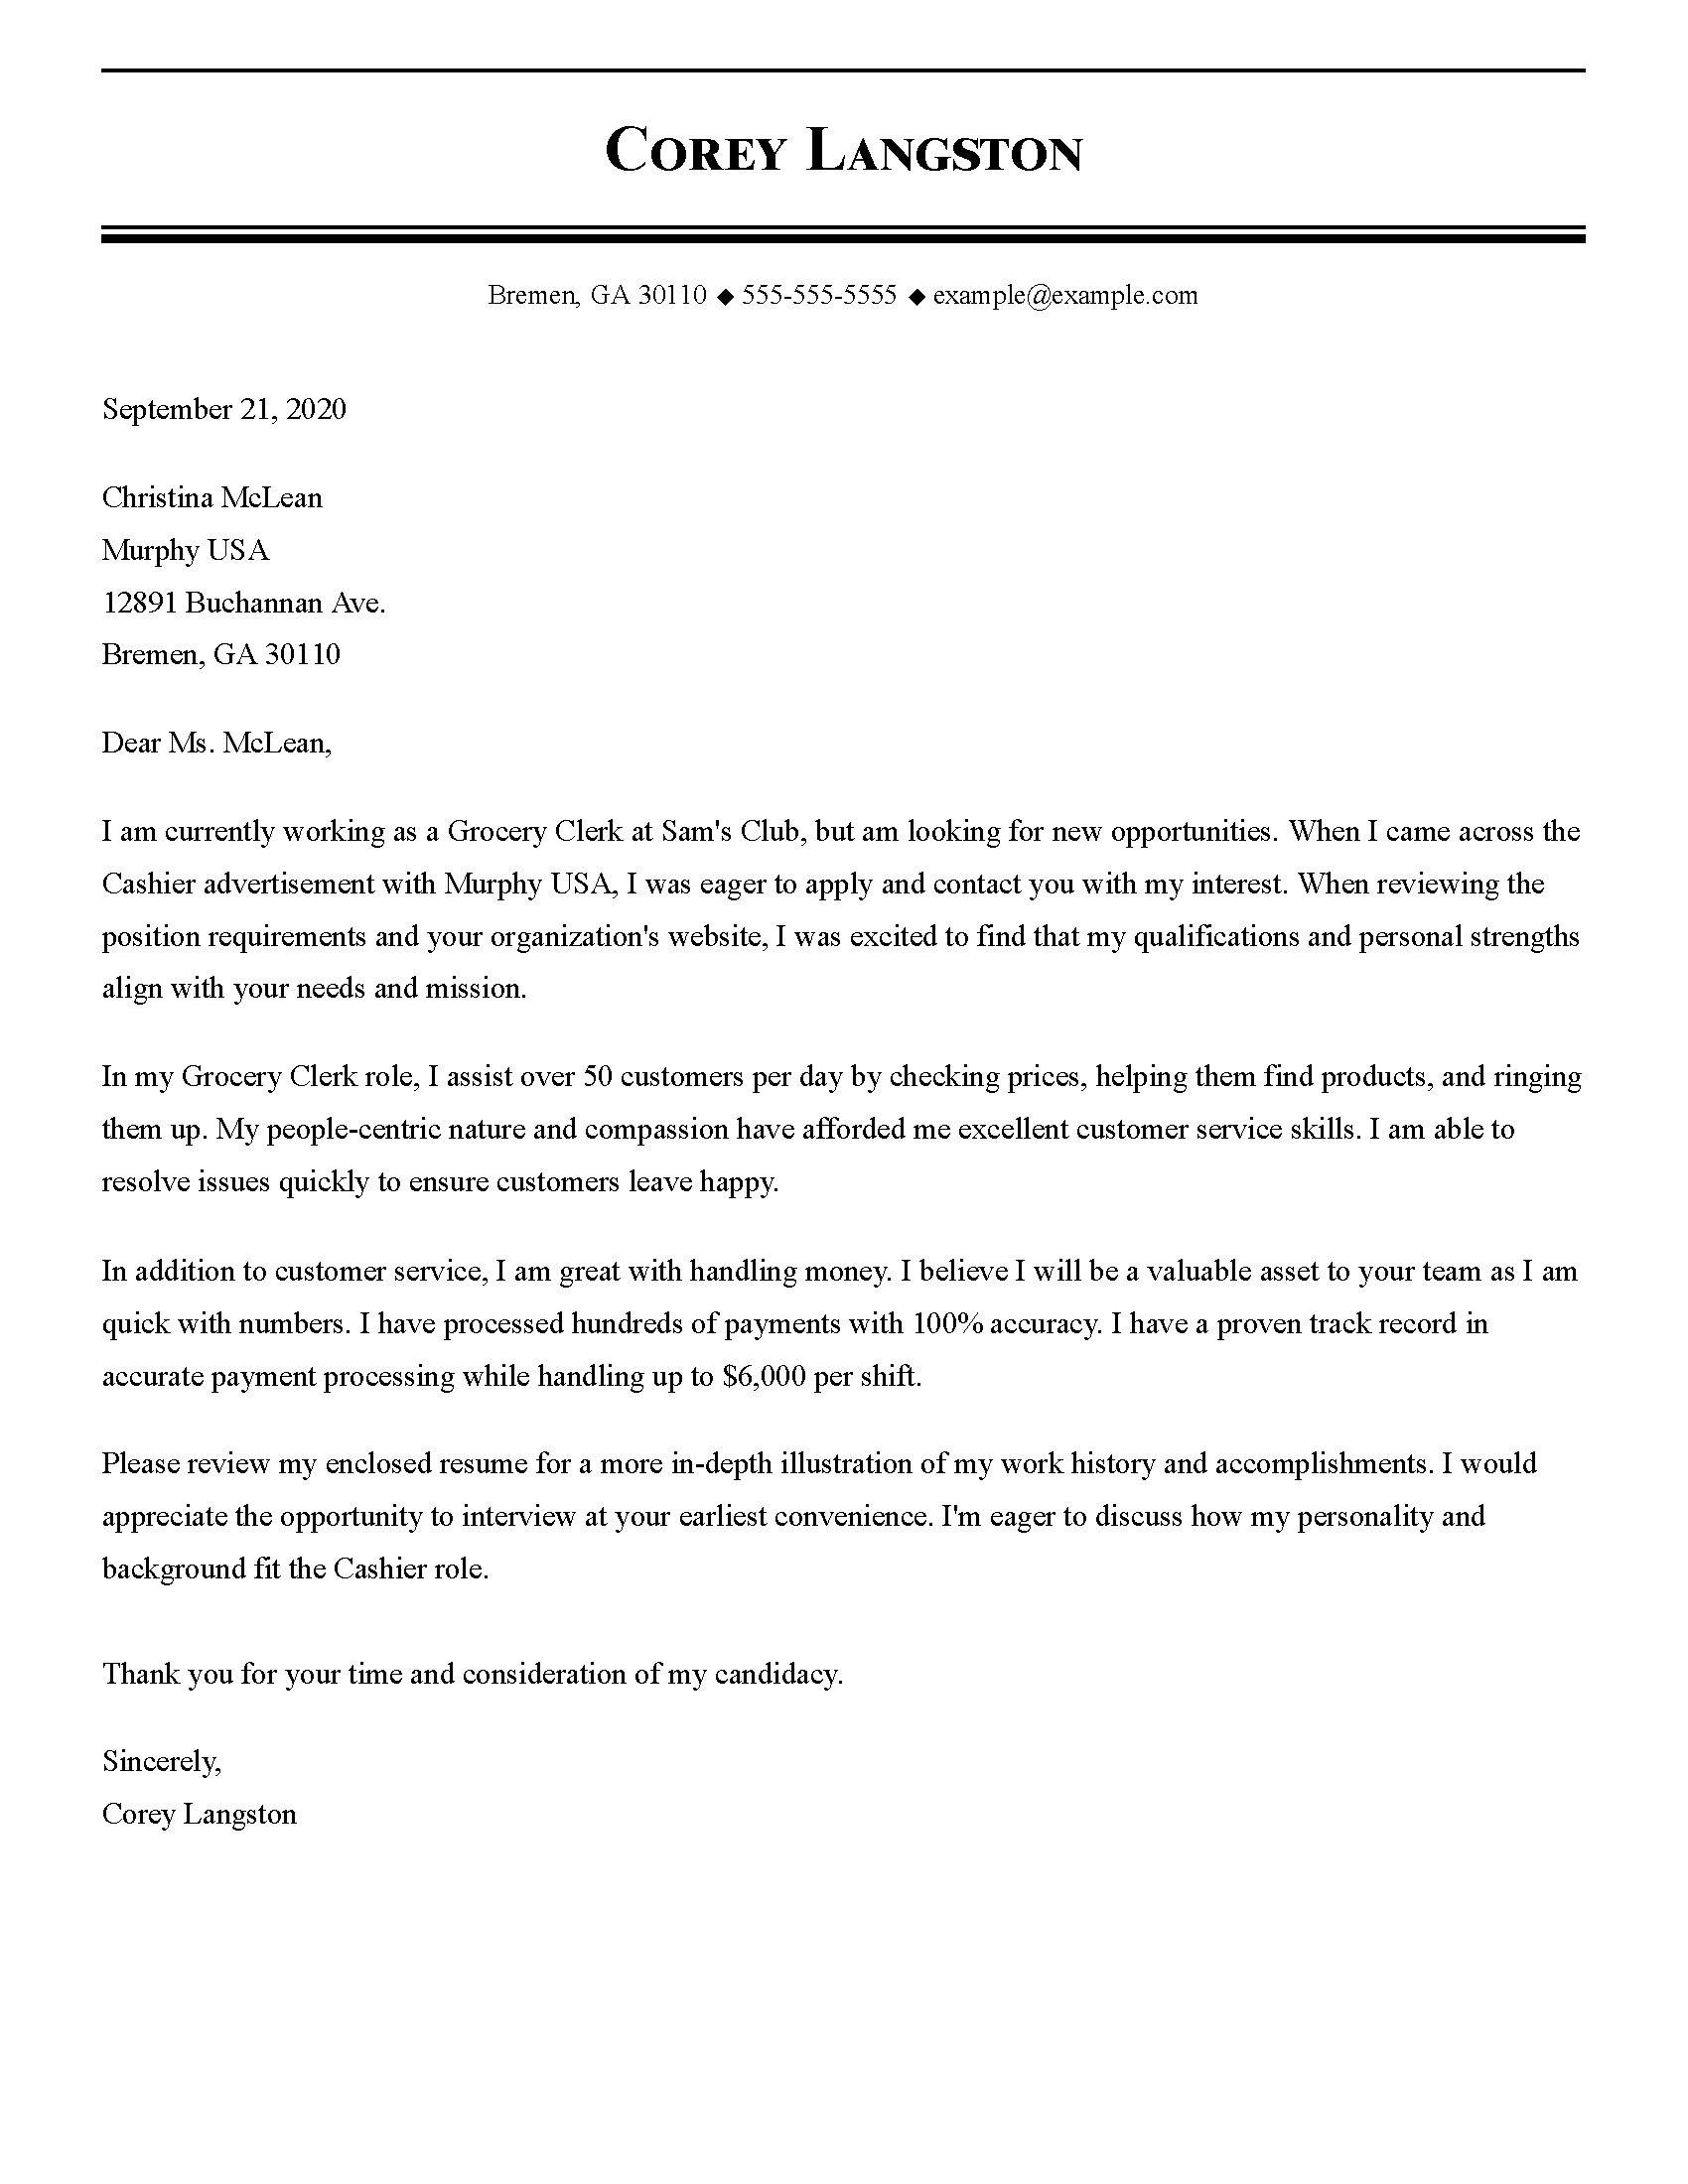 cover letter three paragraphs